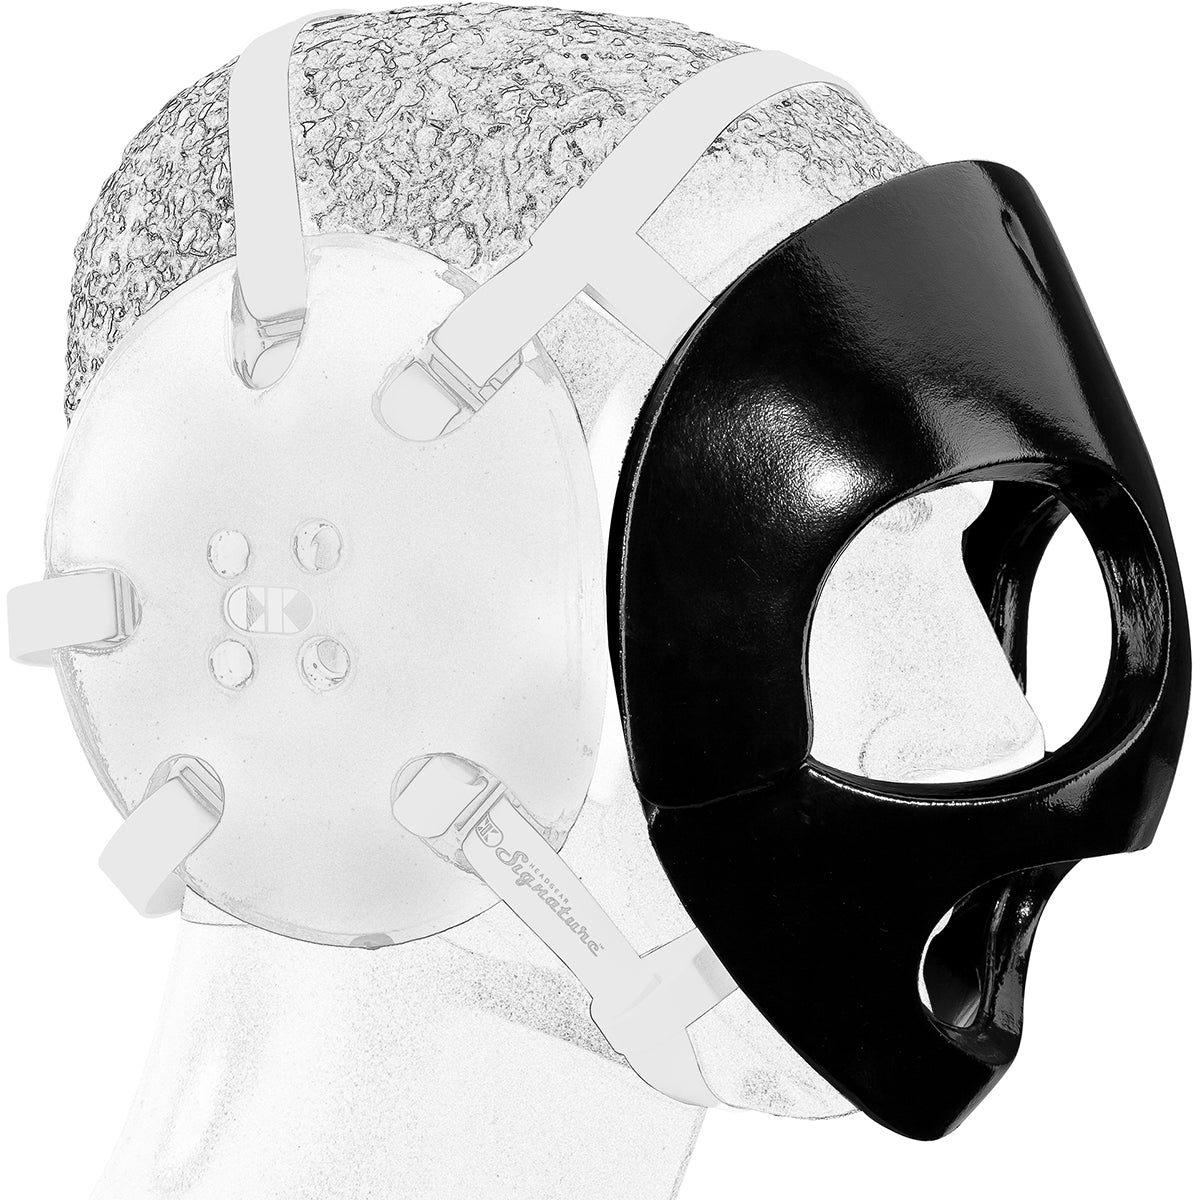 Cliff Keen Wrestling Face Guard with Chin Cup Cliff Keen